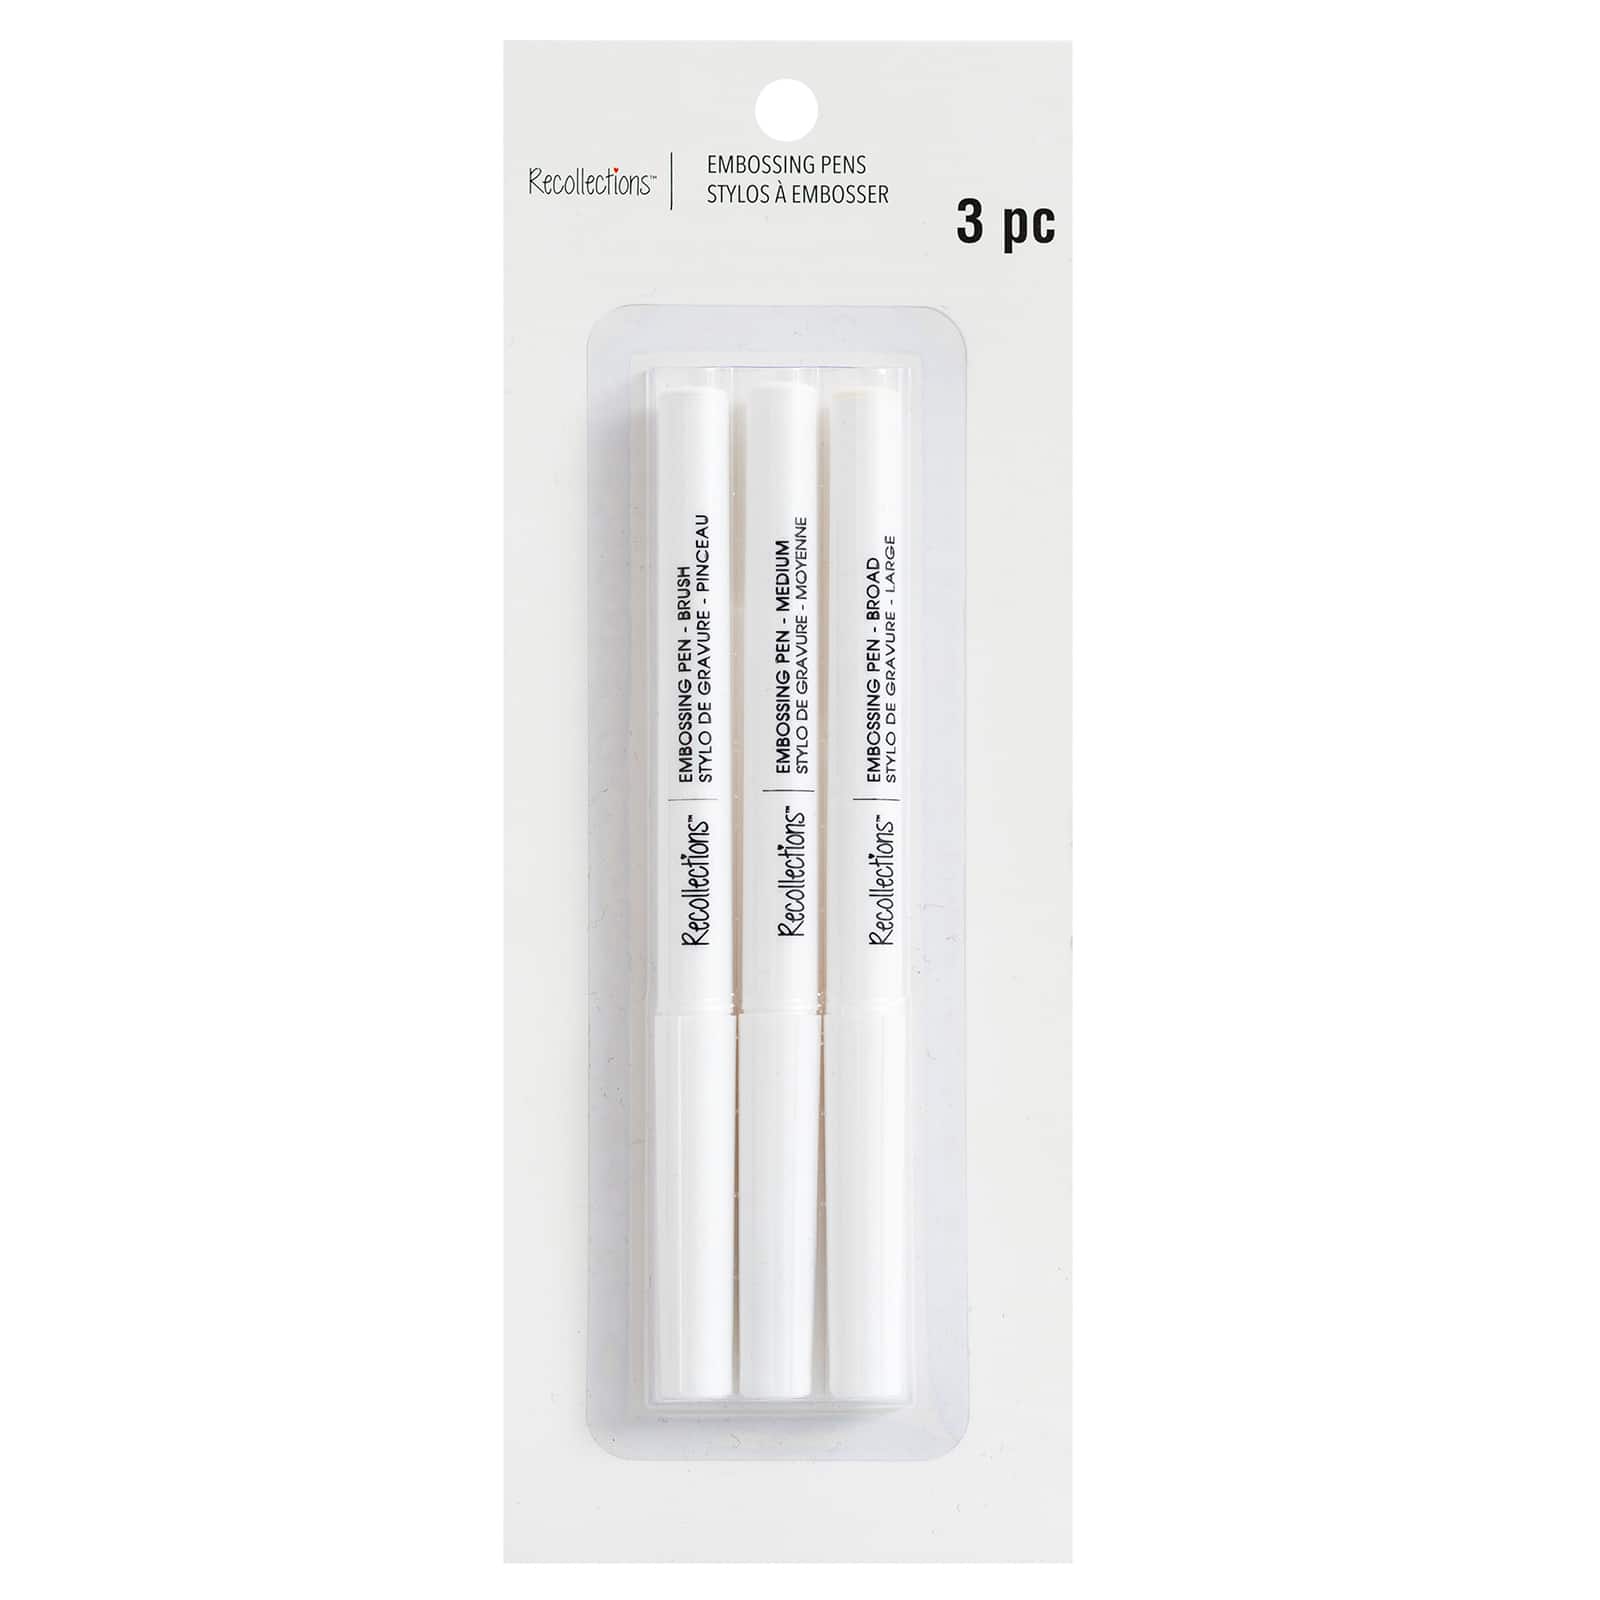 Recollections michaels bulk 12 packs: 3 ct. (36 total) embossing pens by  recollections